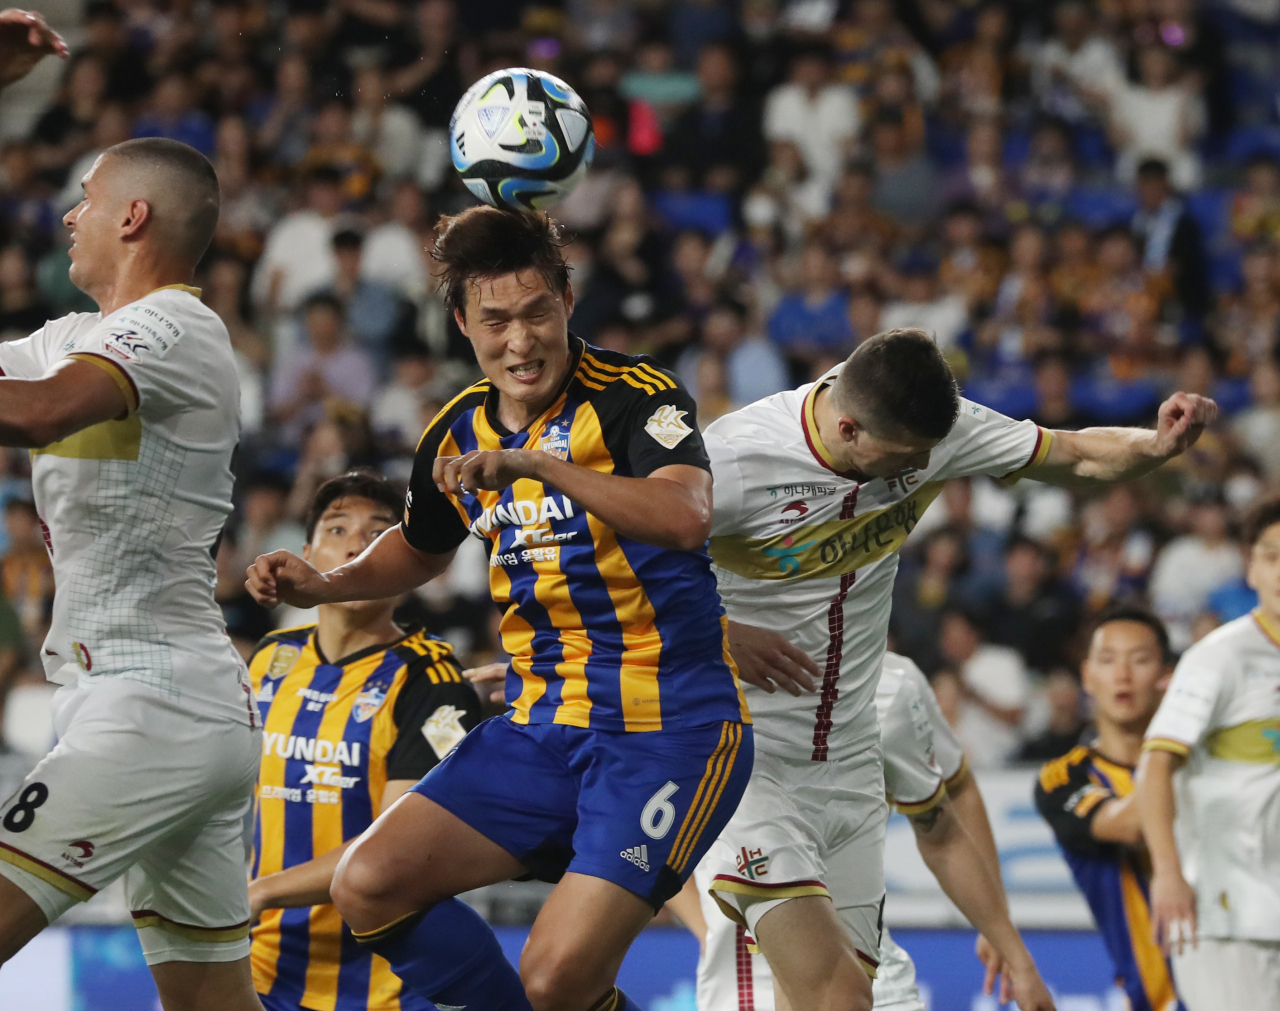 Park Yong-woo of Ulsan Hyundai FC (center) heads the ball during a K League 1 match against Daejeon Hana Citizen FC at Munsu Football Stadium in Ulsan, some 300 kilometers southeast of Seoul, in this file photo taken May 28. (Yonhap)